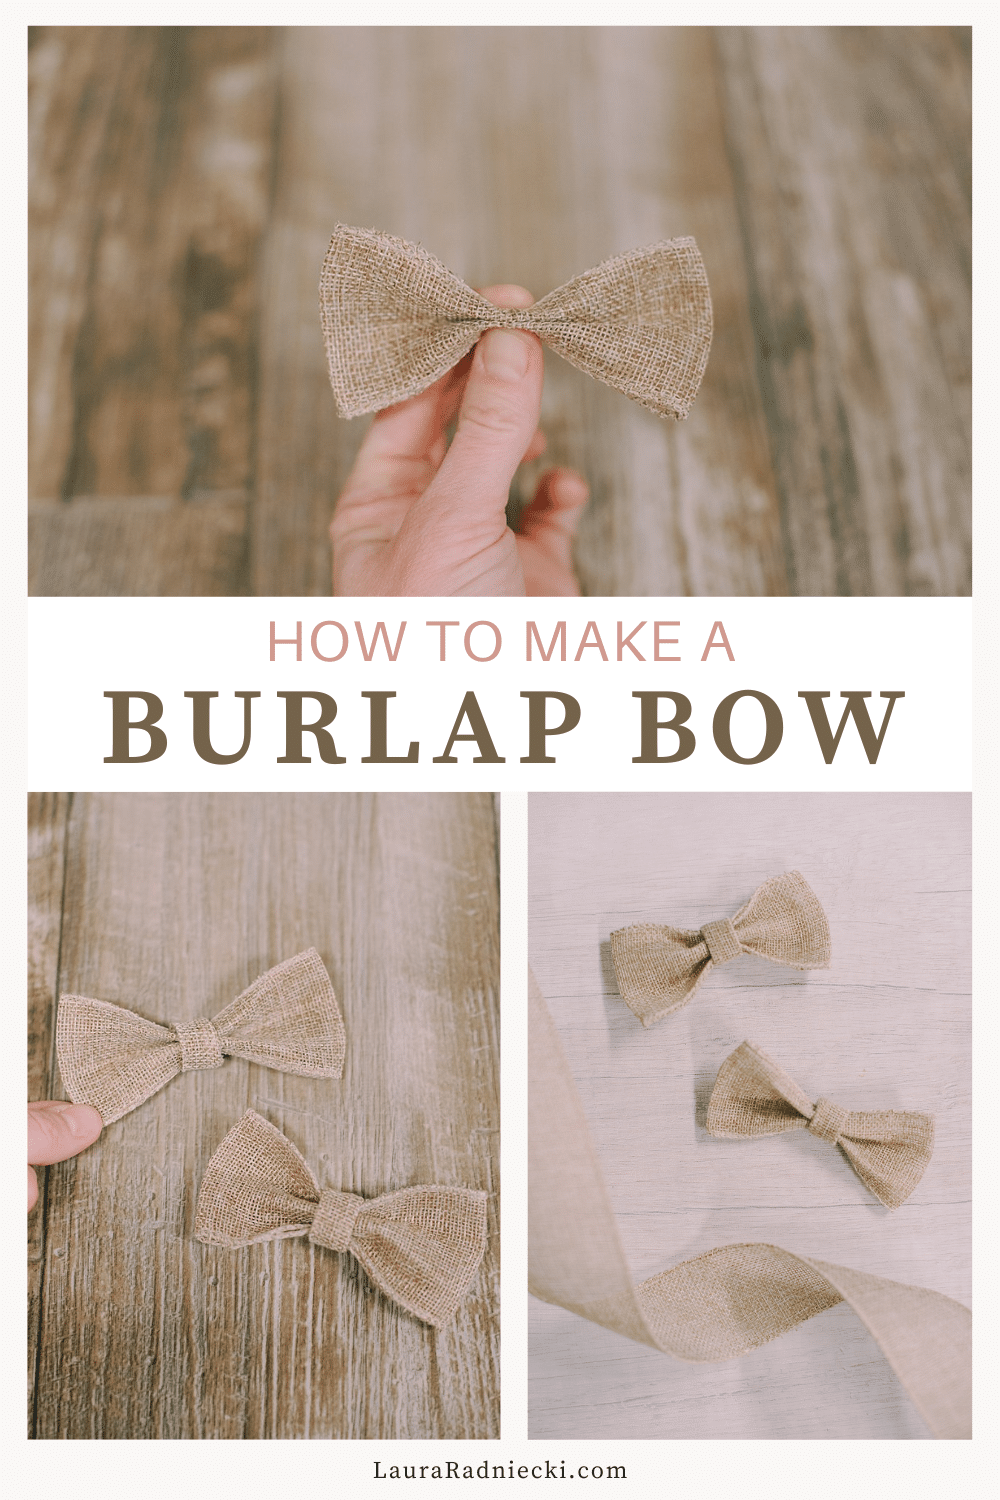 How to Make Bows from Burlap Ribbon